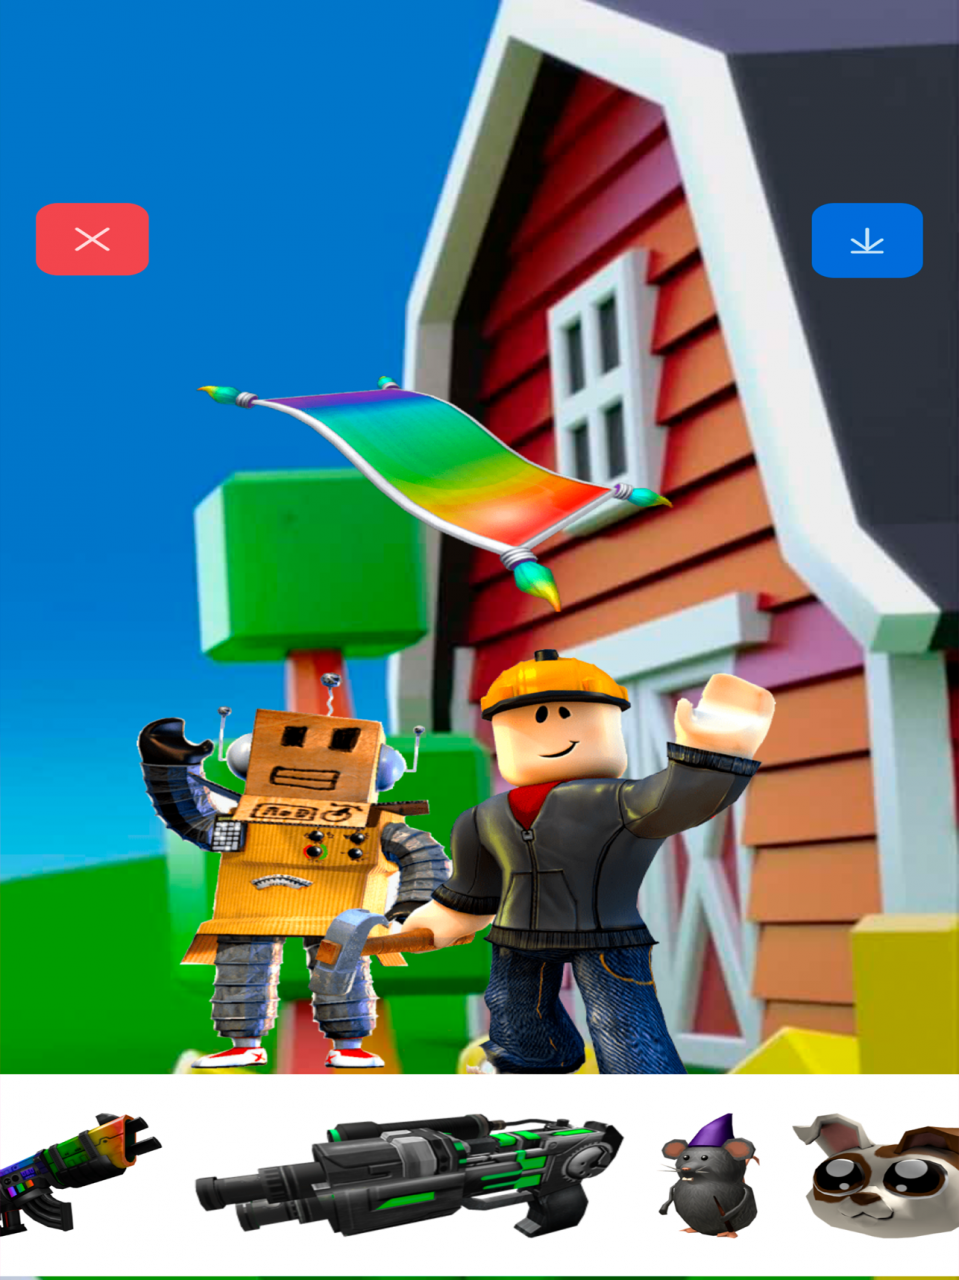 Skin Studio - Skins for Roblox on the App Store